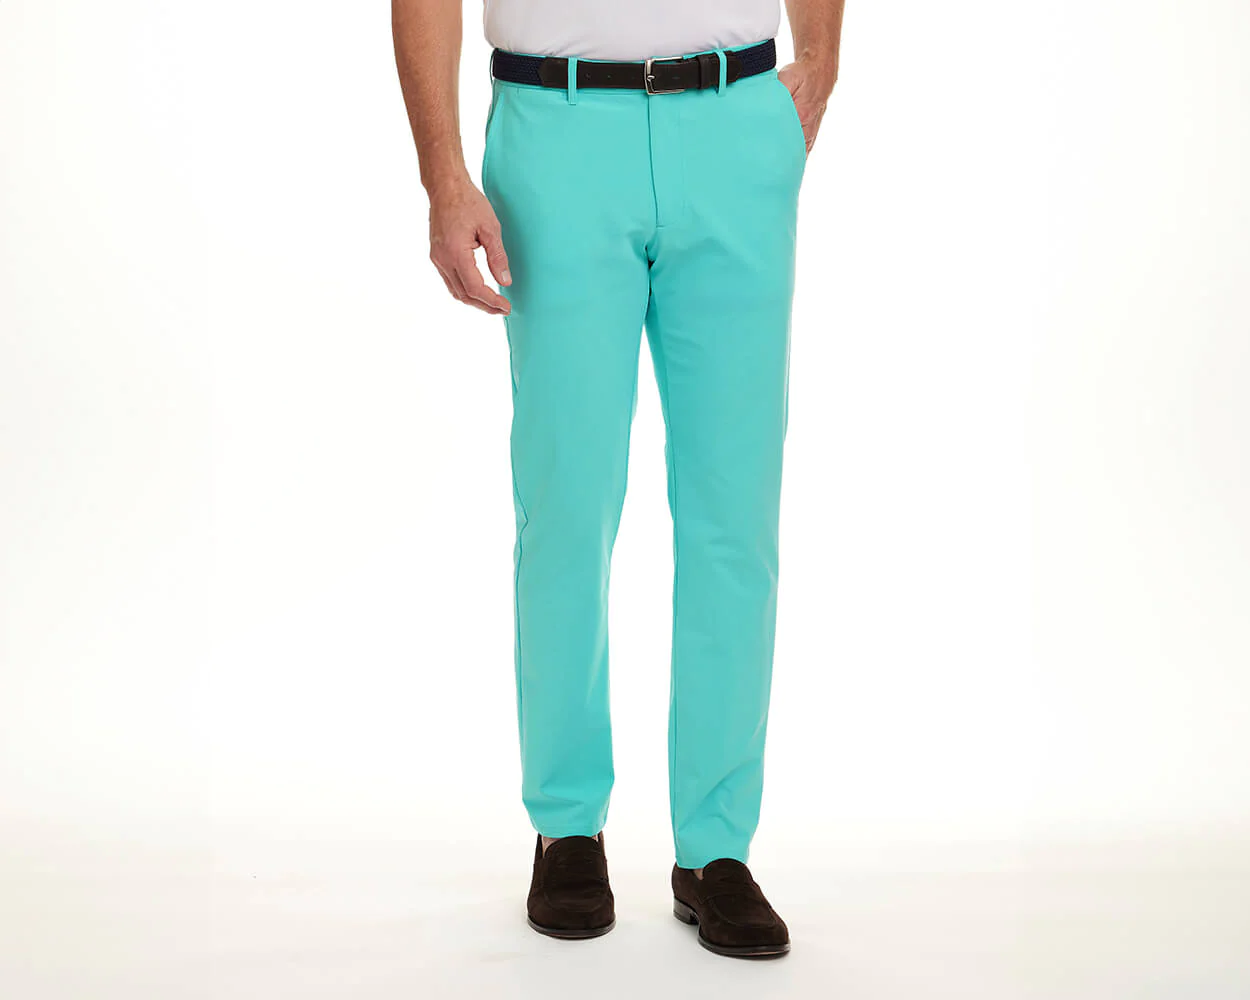 Holderness and Bourne Golf Pants